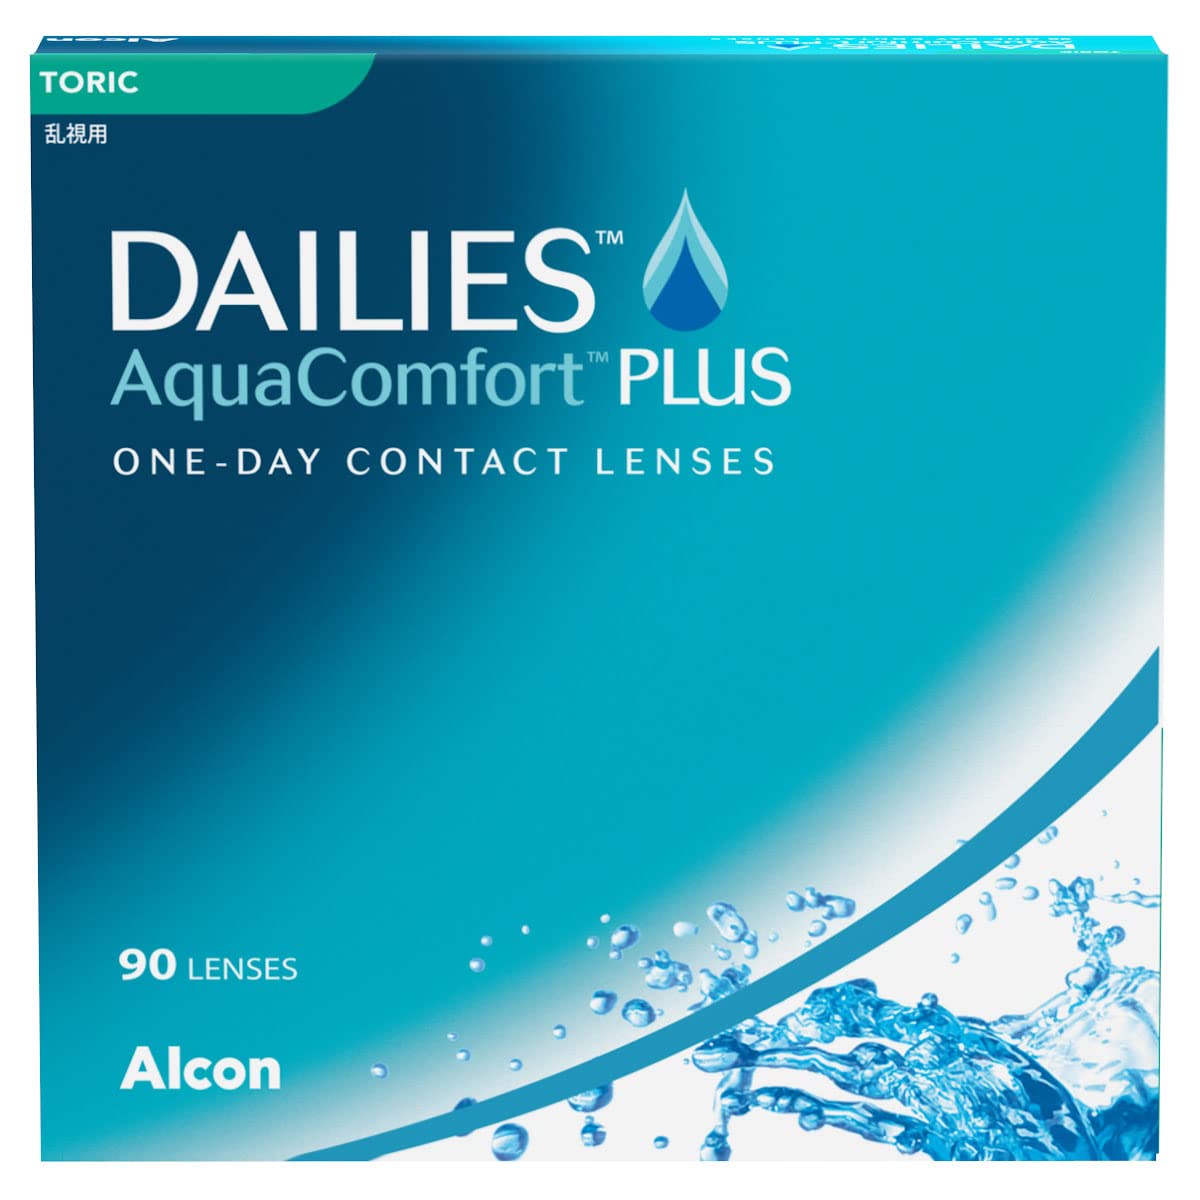 Dailies AquaComfort Plus Toric Tageslinsen weich, 90 Stück, BC 8.8 mm, DIA 14.4 mm, CYL -0.75, ACHSE 110, -1.5 Dioptrien